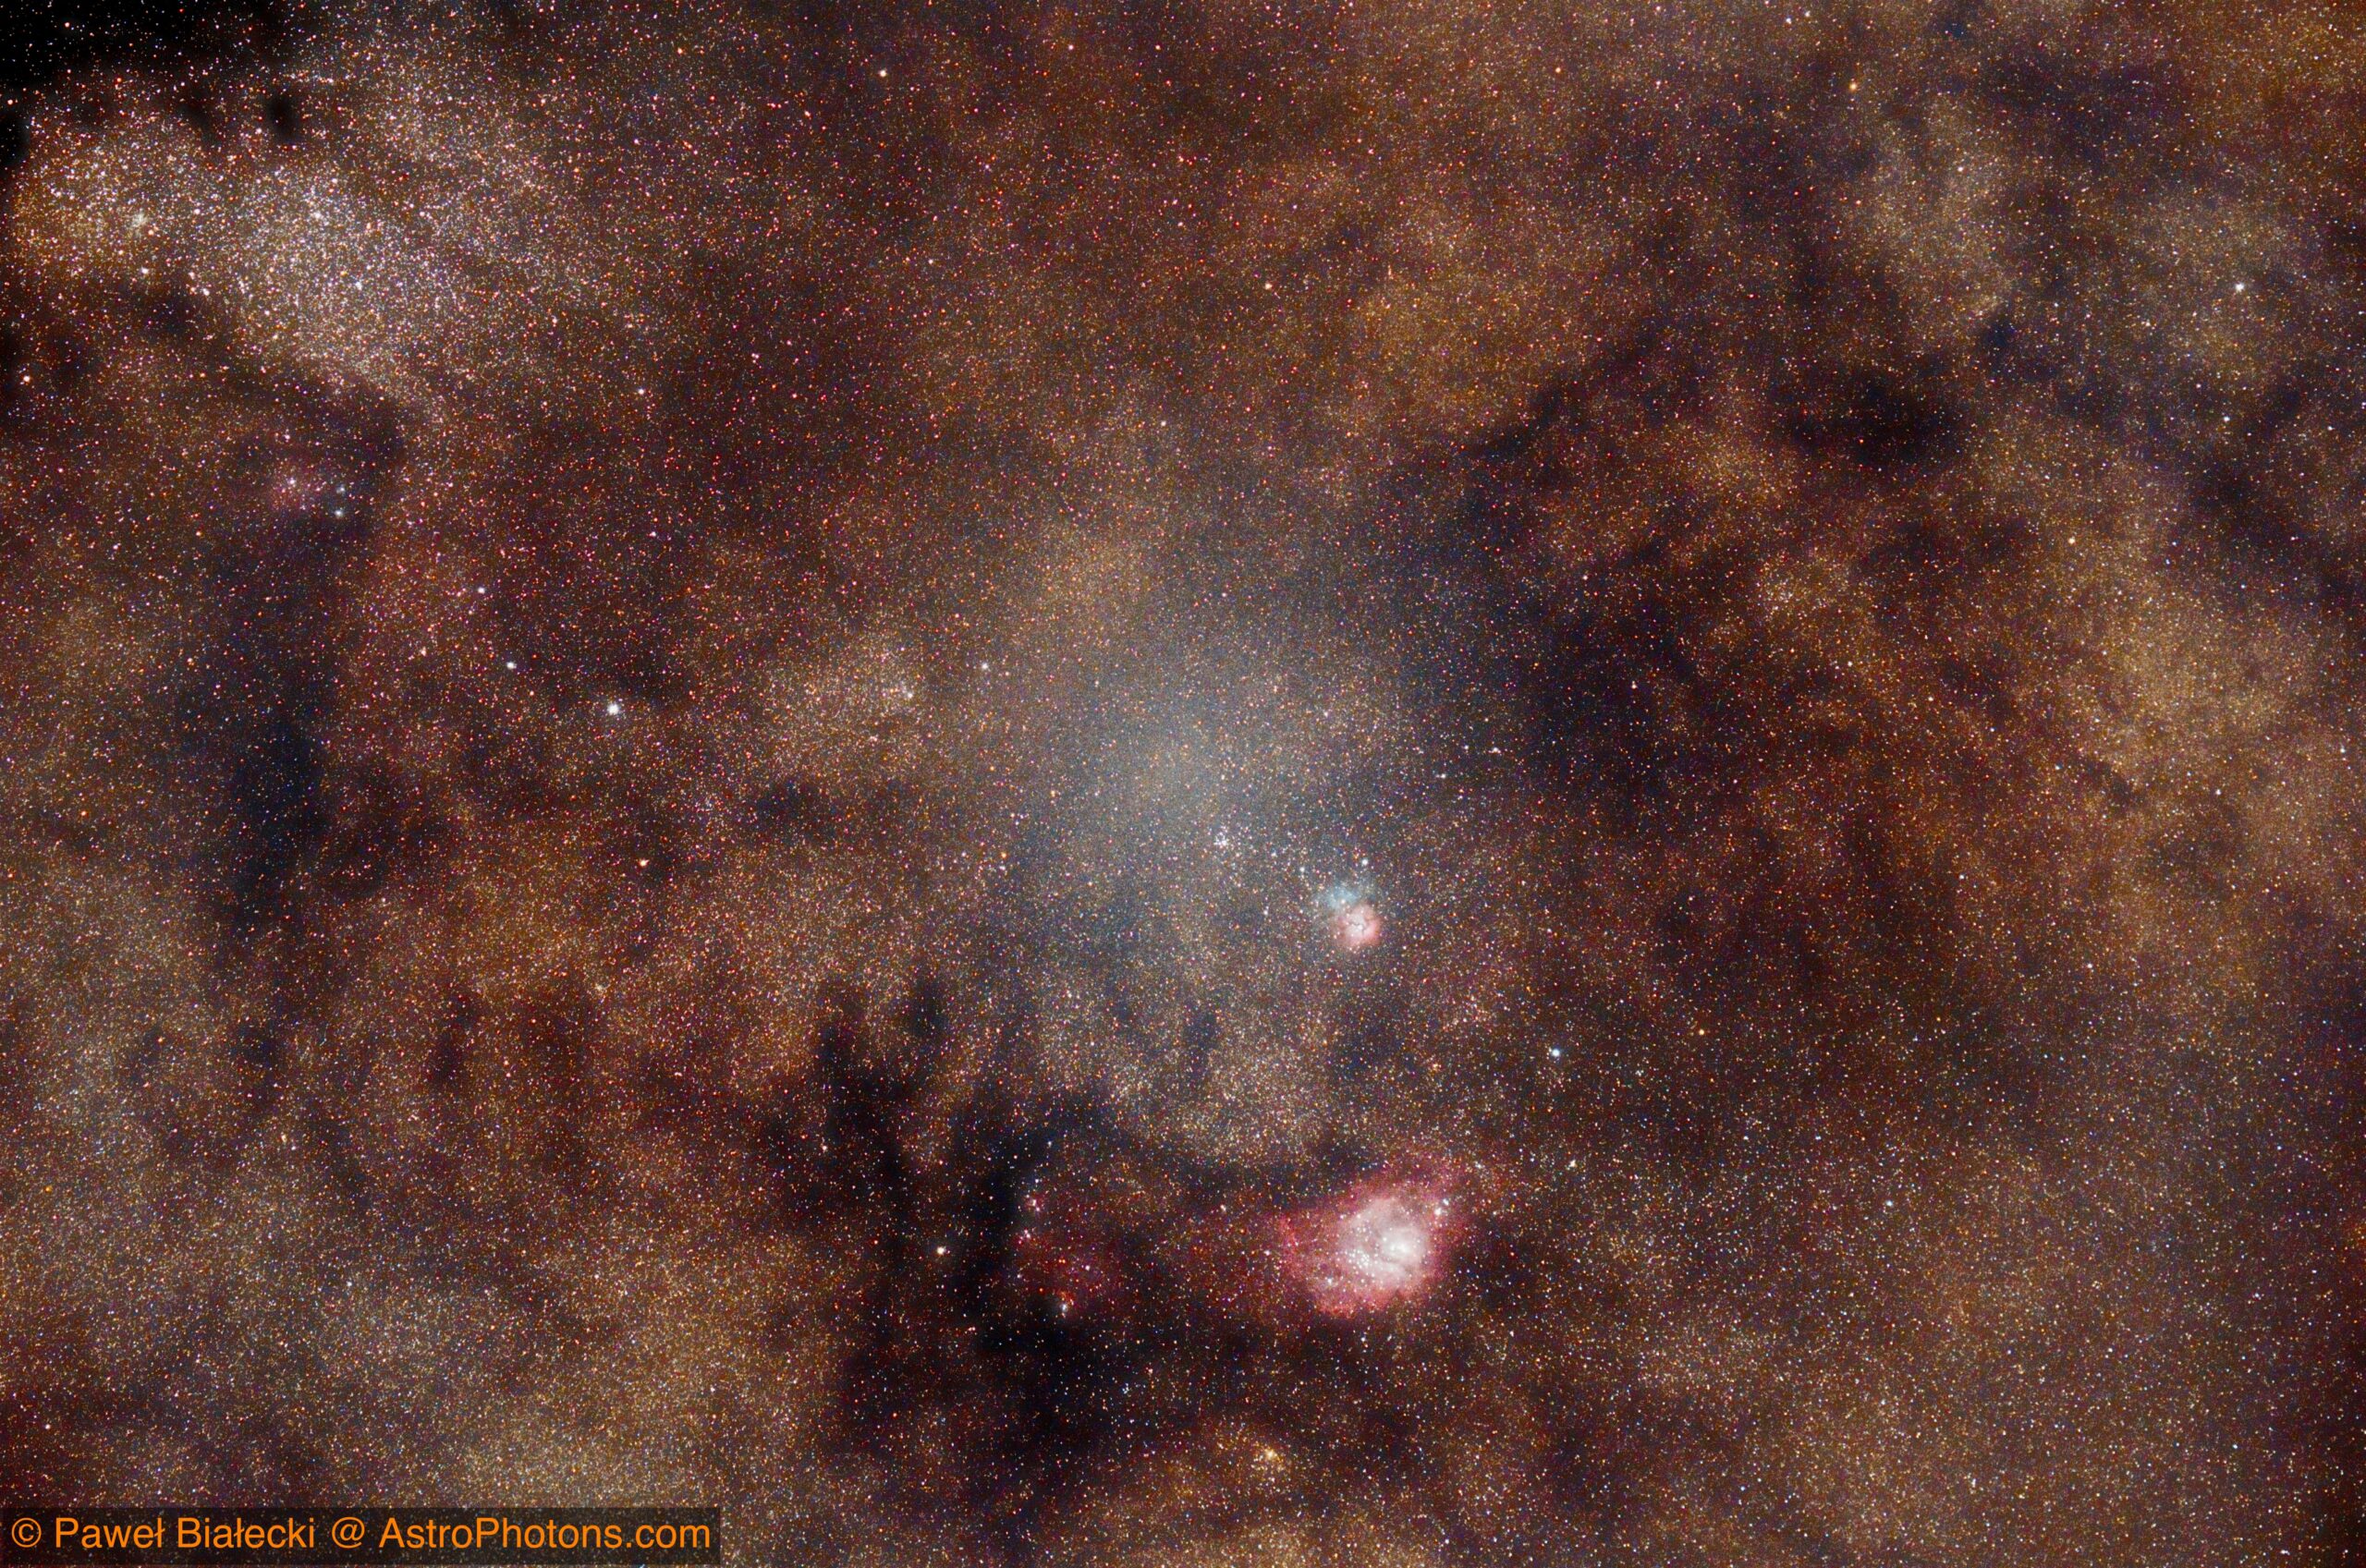 Trifid and Lagoon nebulae captured by Rokinon 135mm F/2 lens